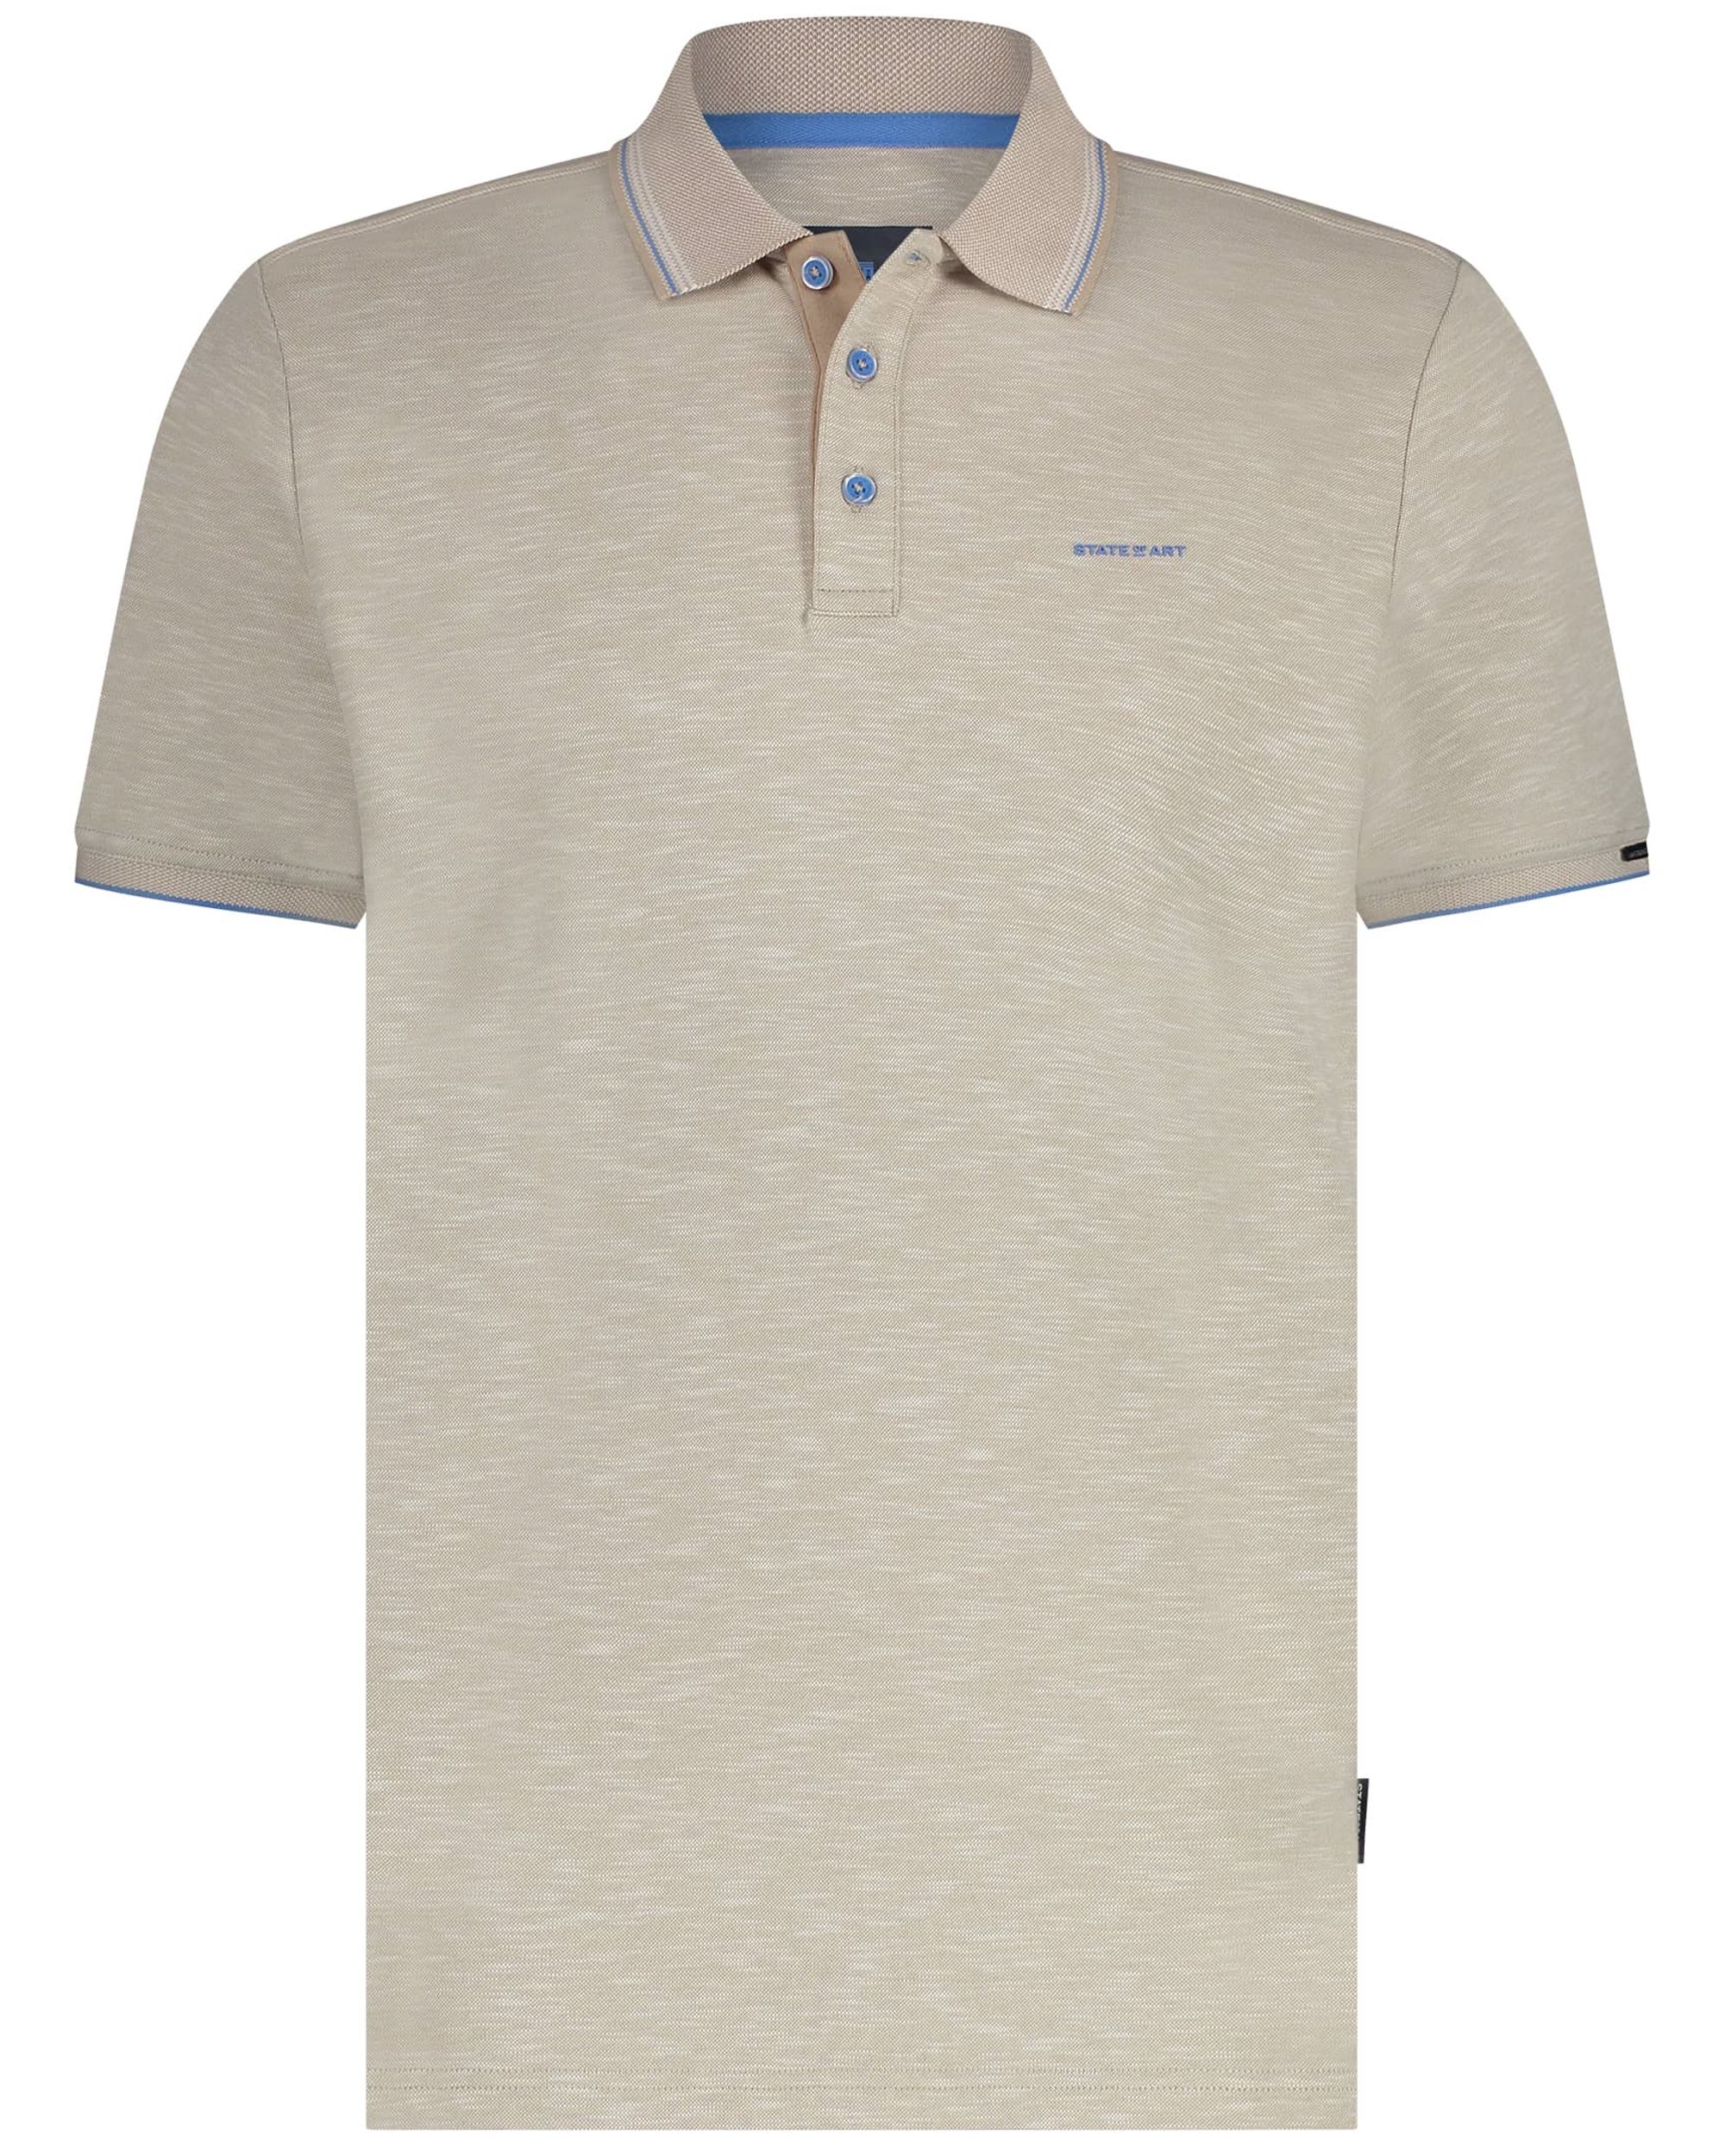 State of Art Polo KM Beige 094968-001-4XL